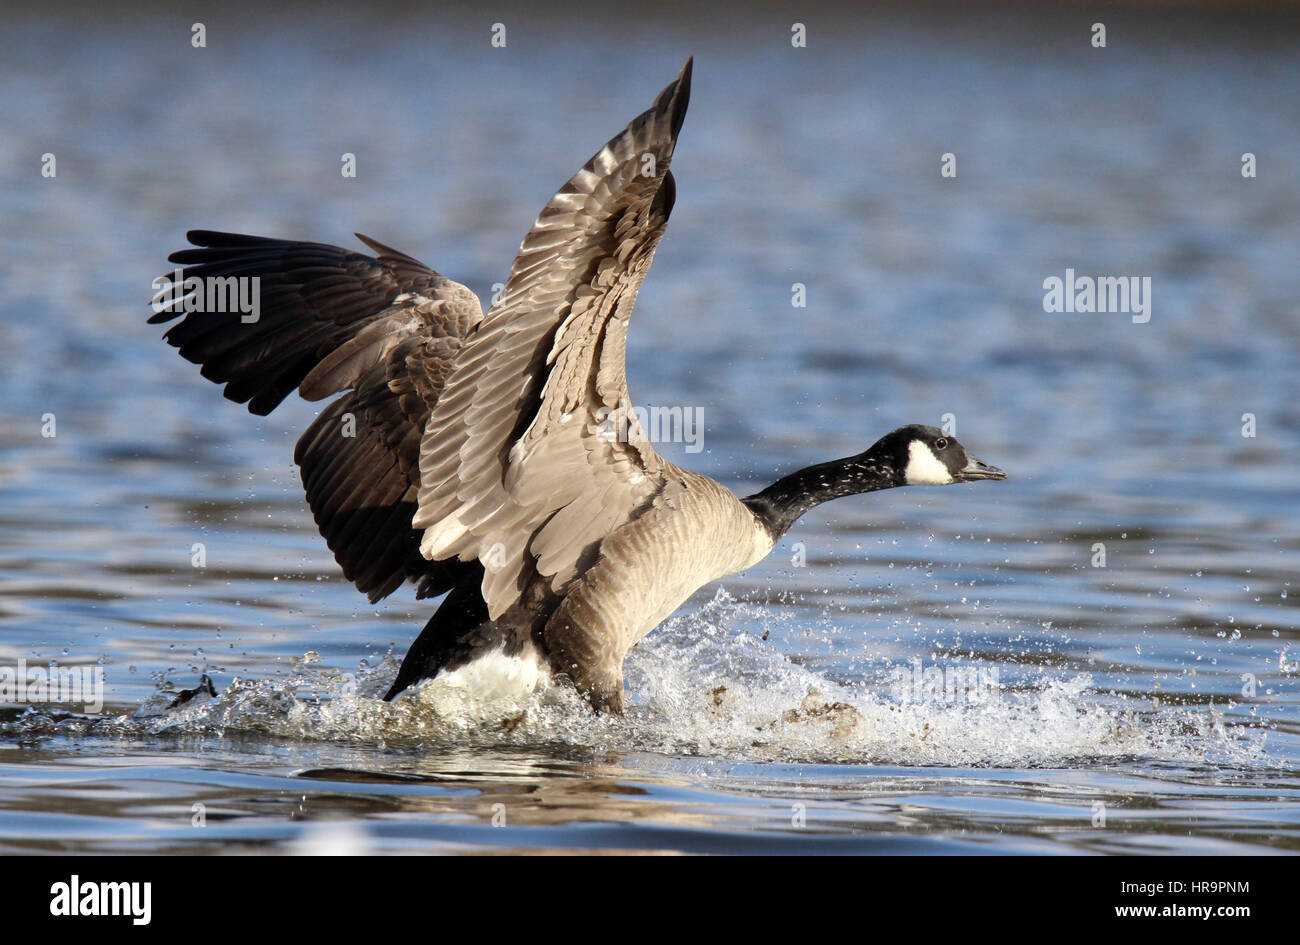 A Canada goose flying in to land on a pond. Stock Photo